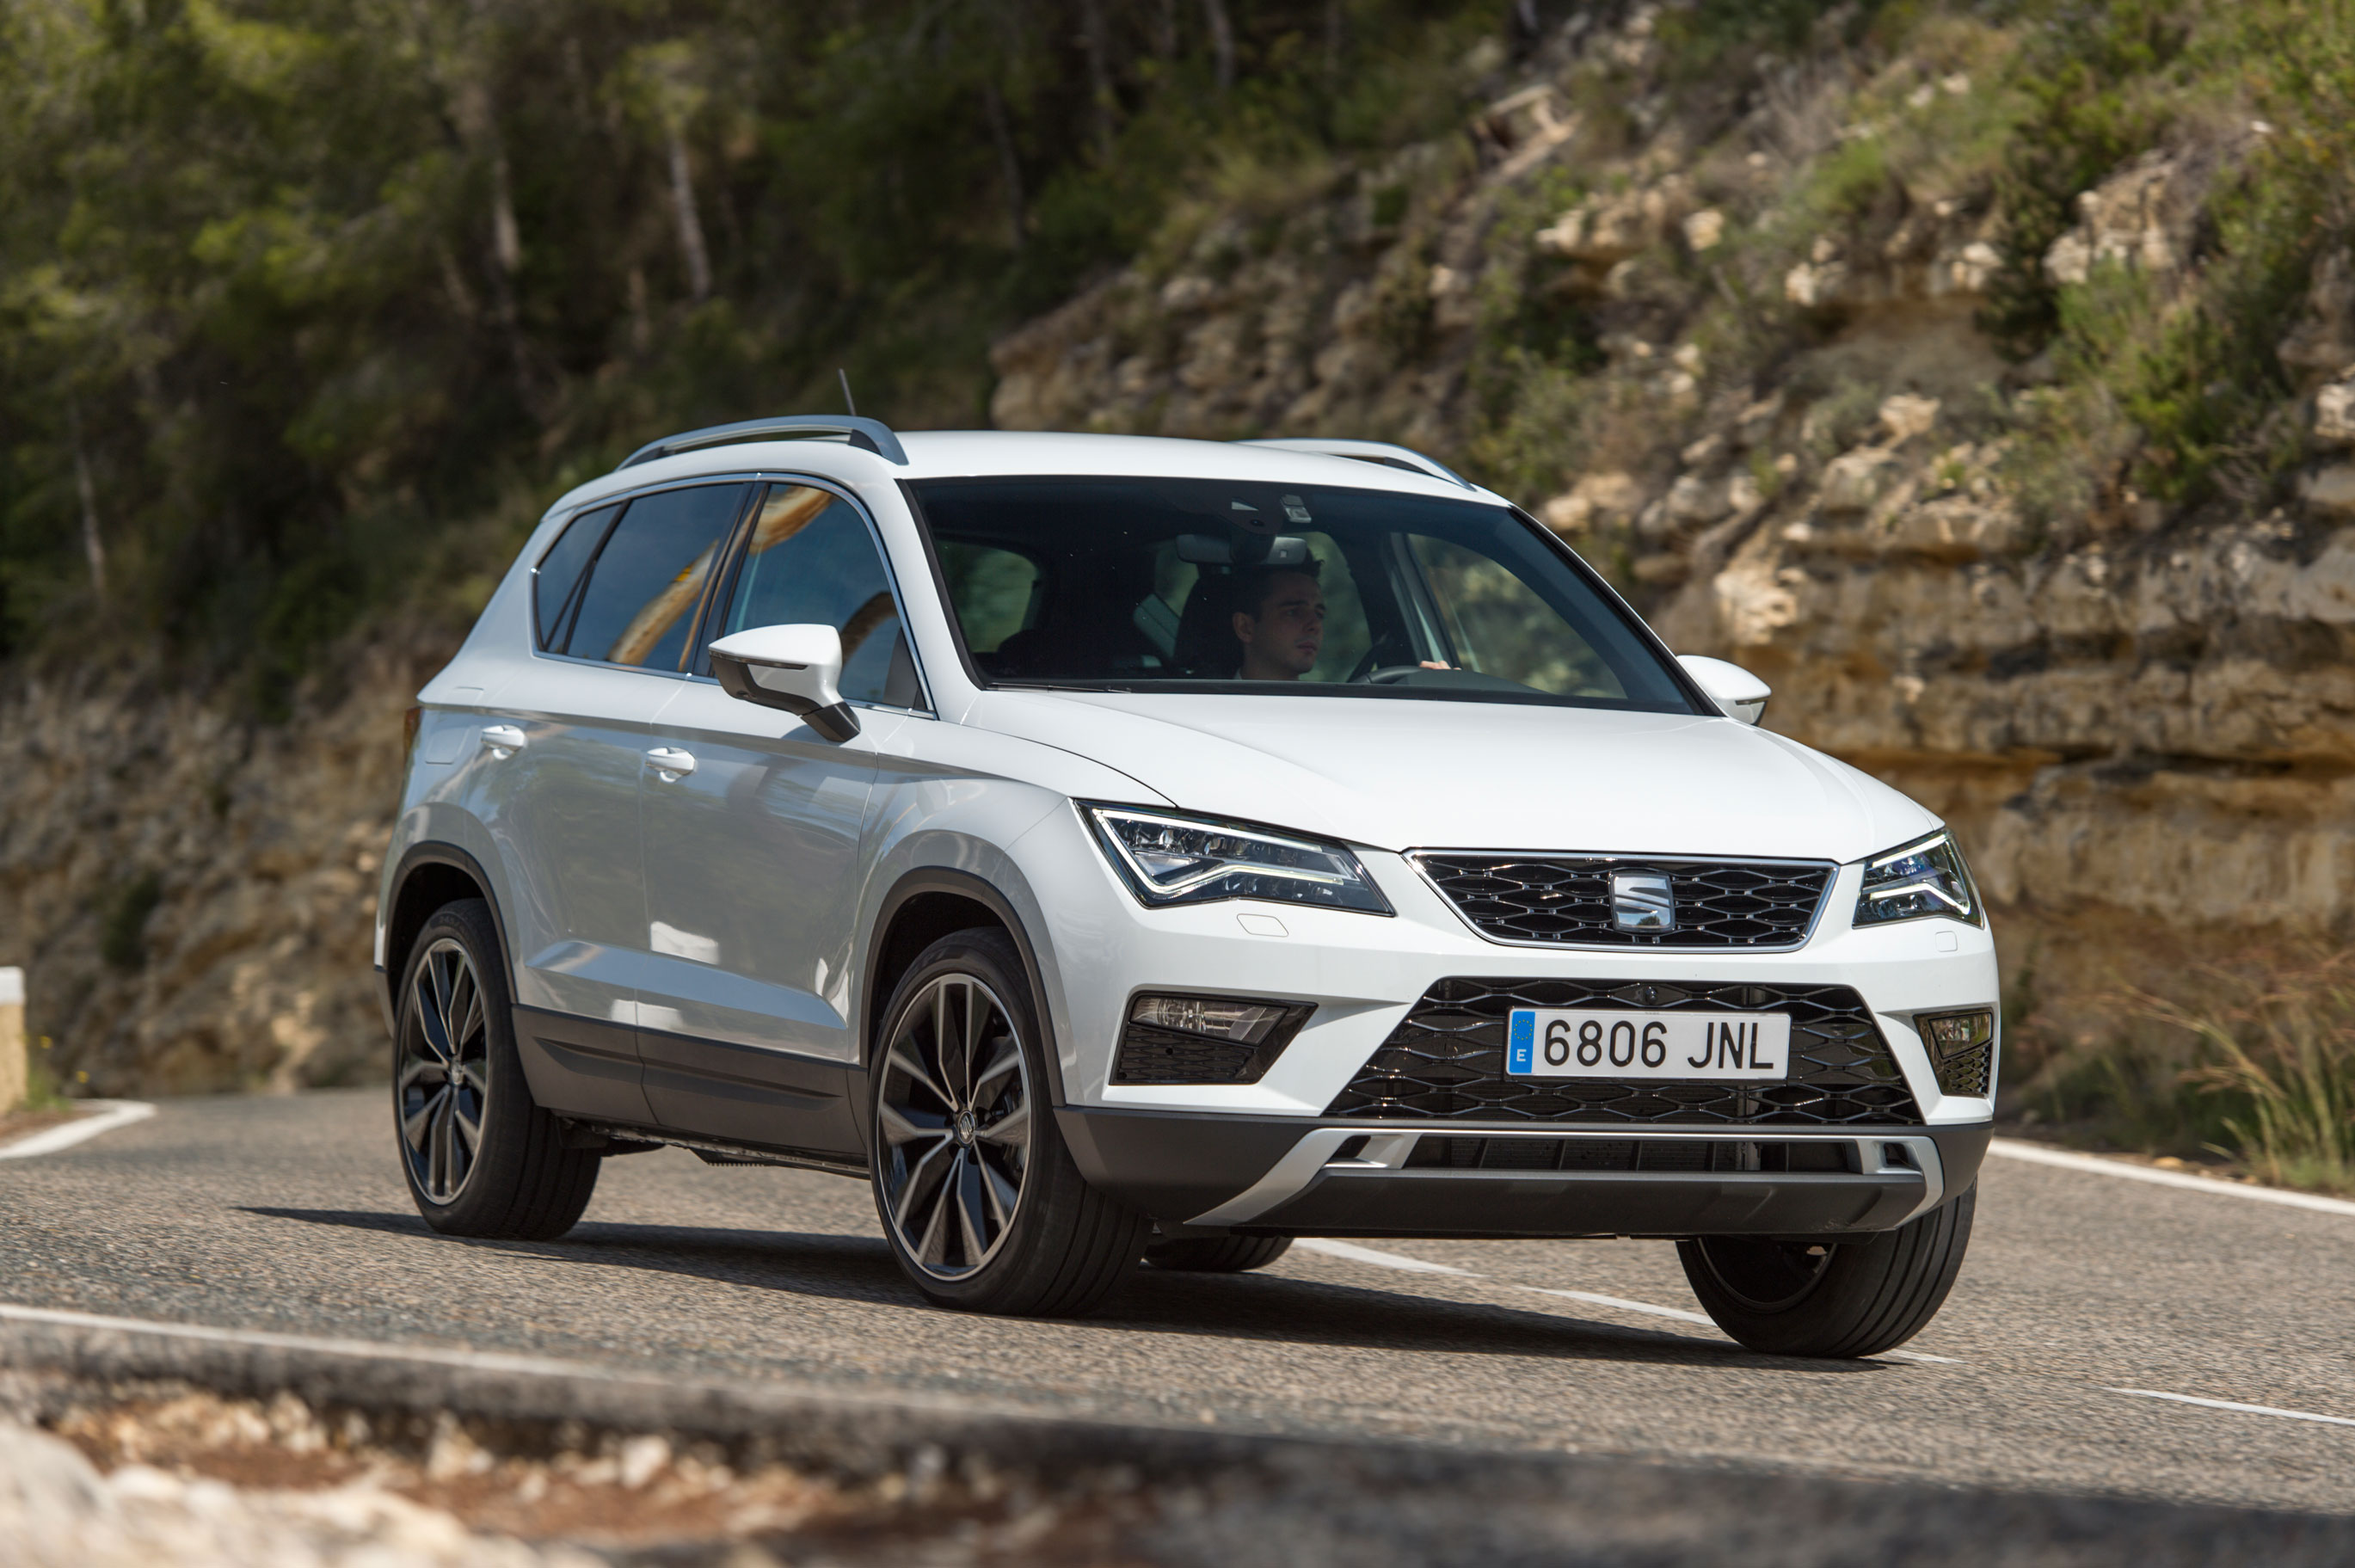 New SEAT Ateca 2016 review – good looks and great build quality, but